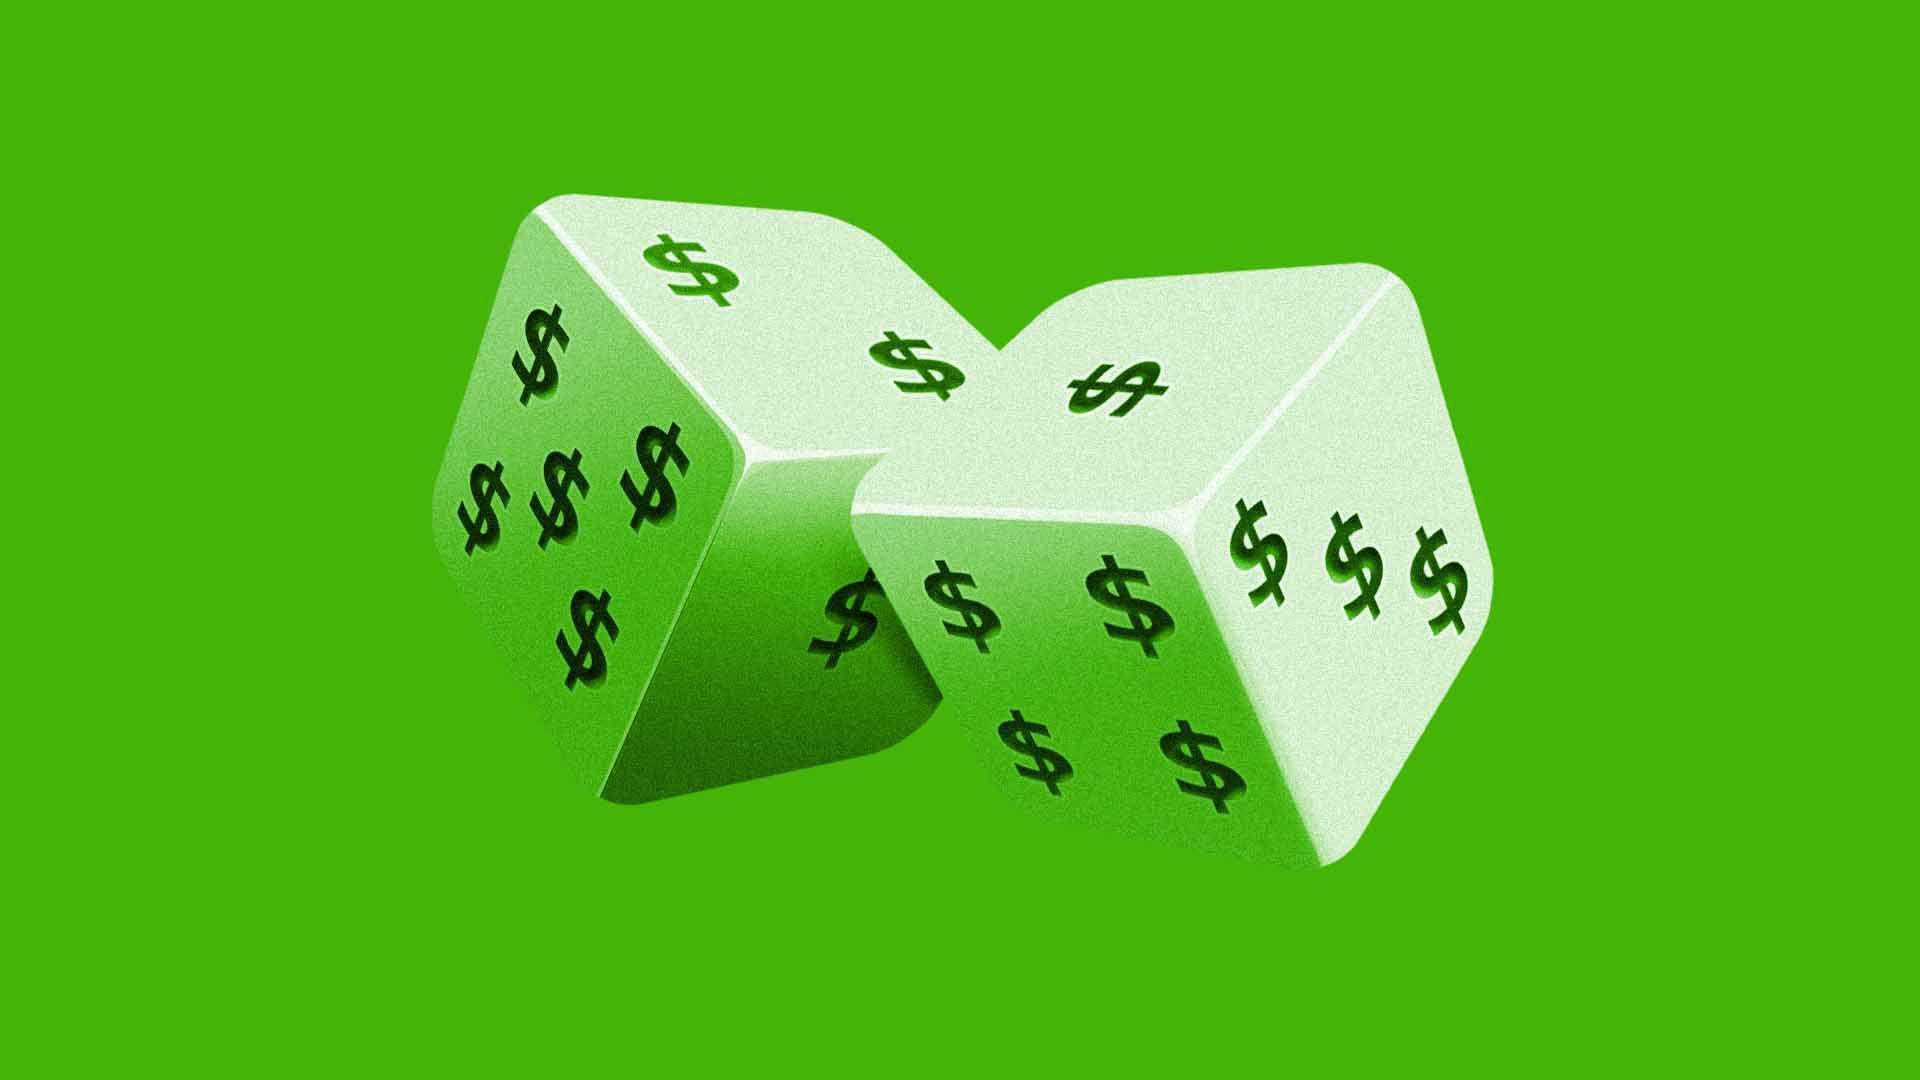 illustration of a dice with money signs on it instead of dots